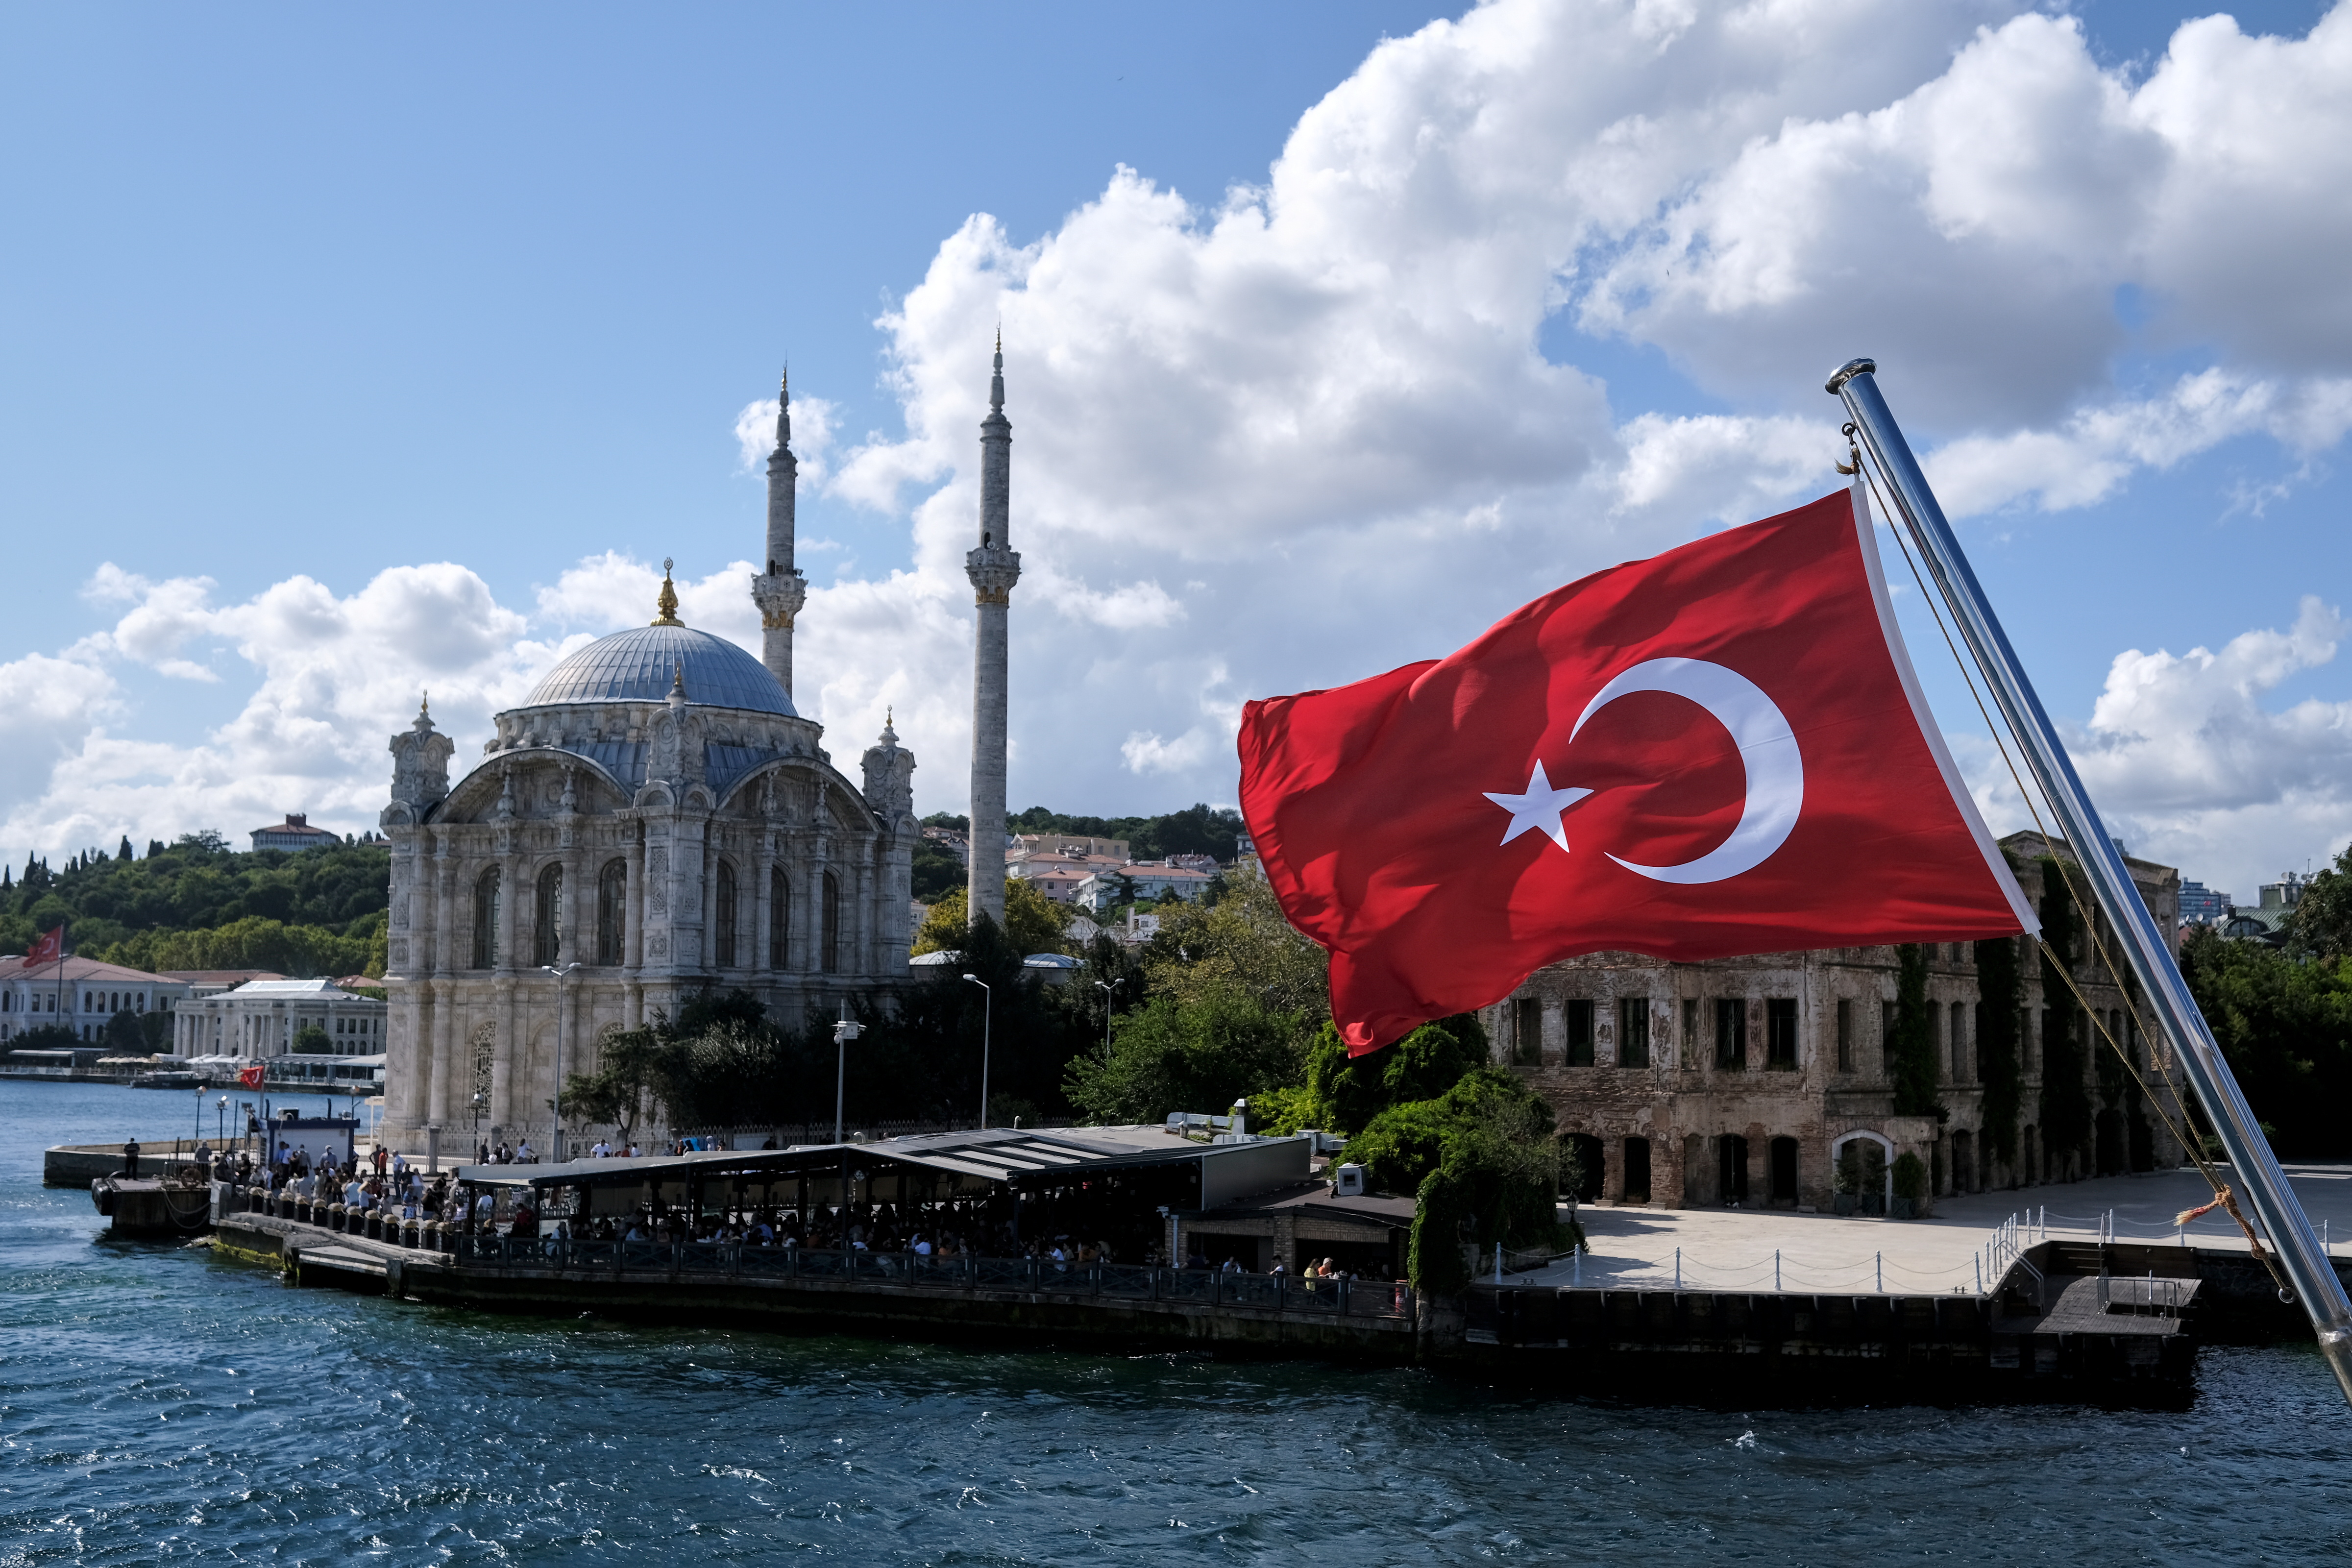 A Turkish flag is pictured on a boat with the Ortakoy Mosque in the background in Istanbul